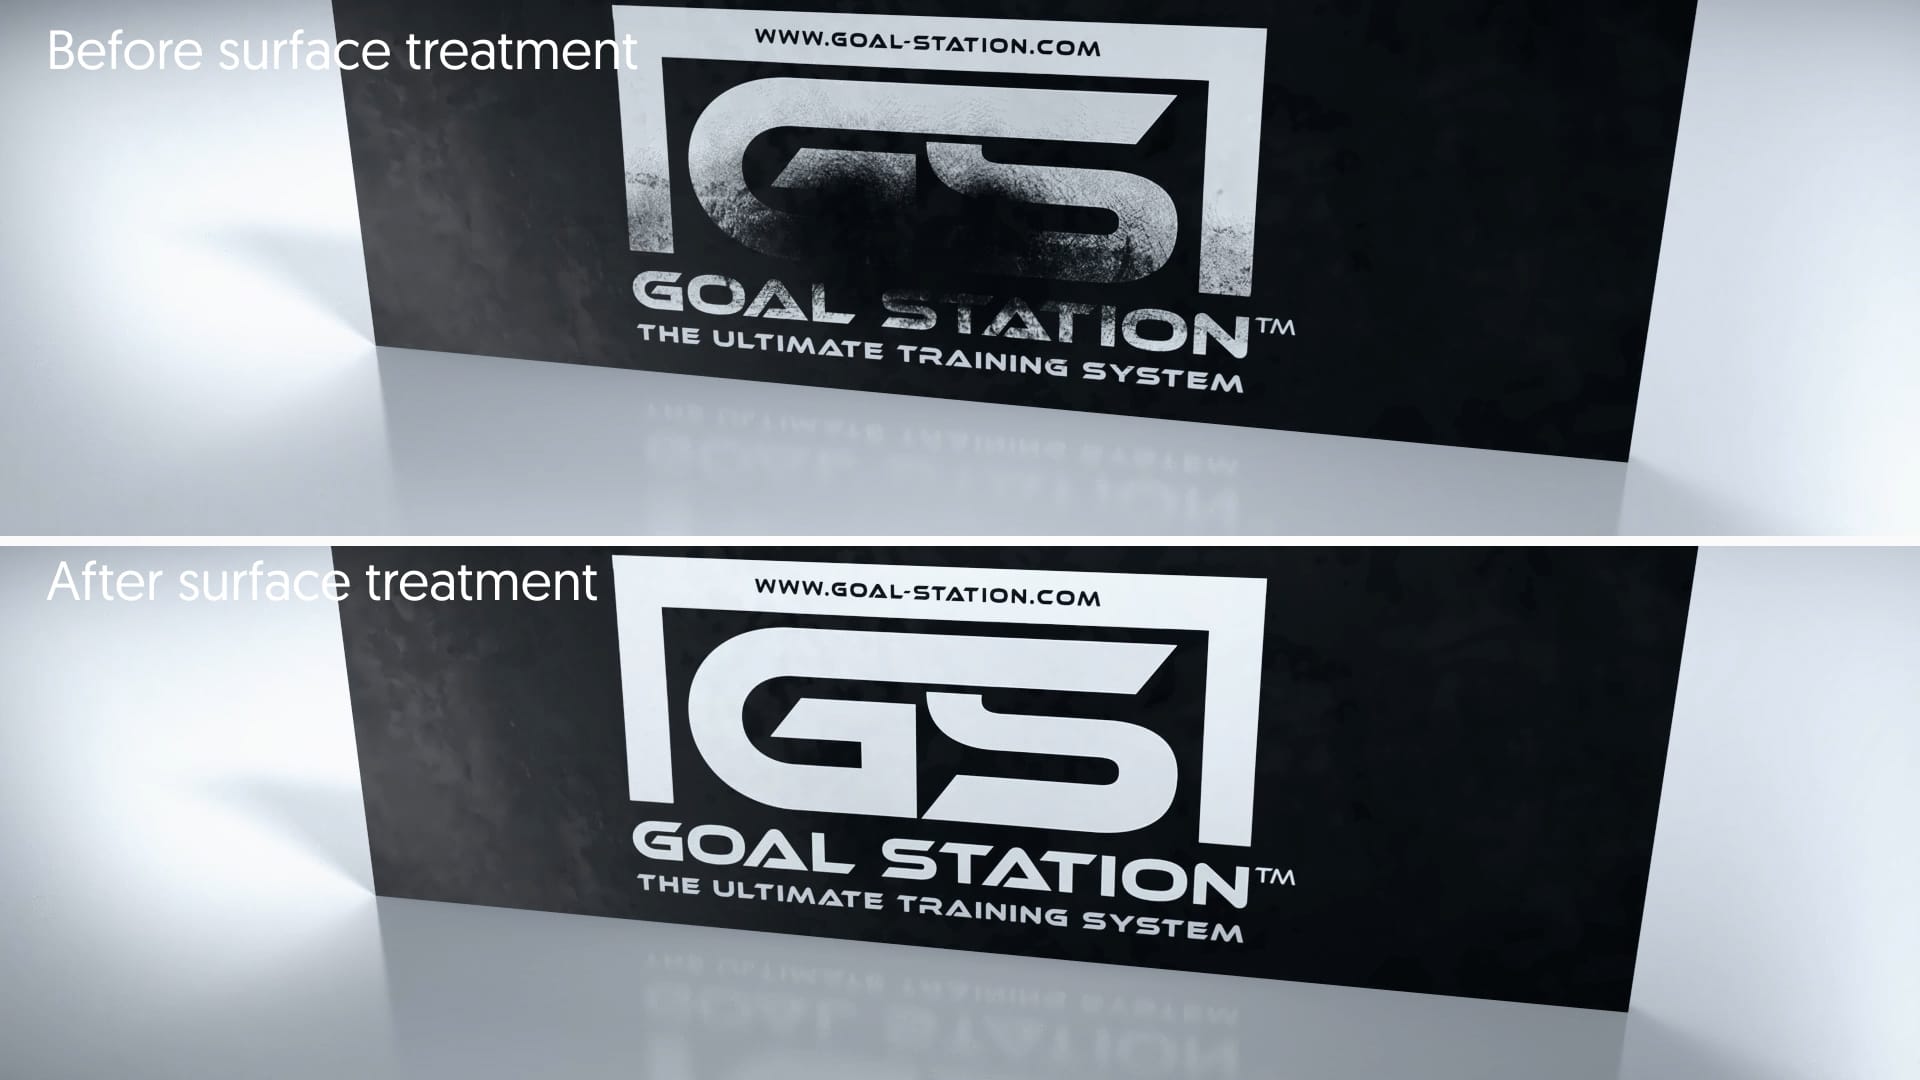 Tantec SheetTEC Goalstation before and after treatment